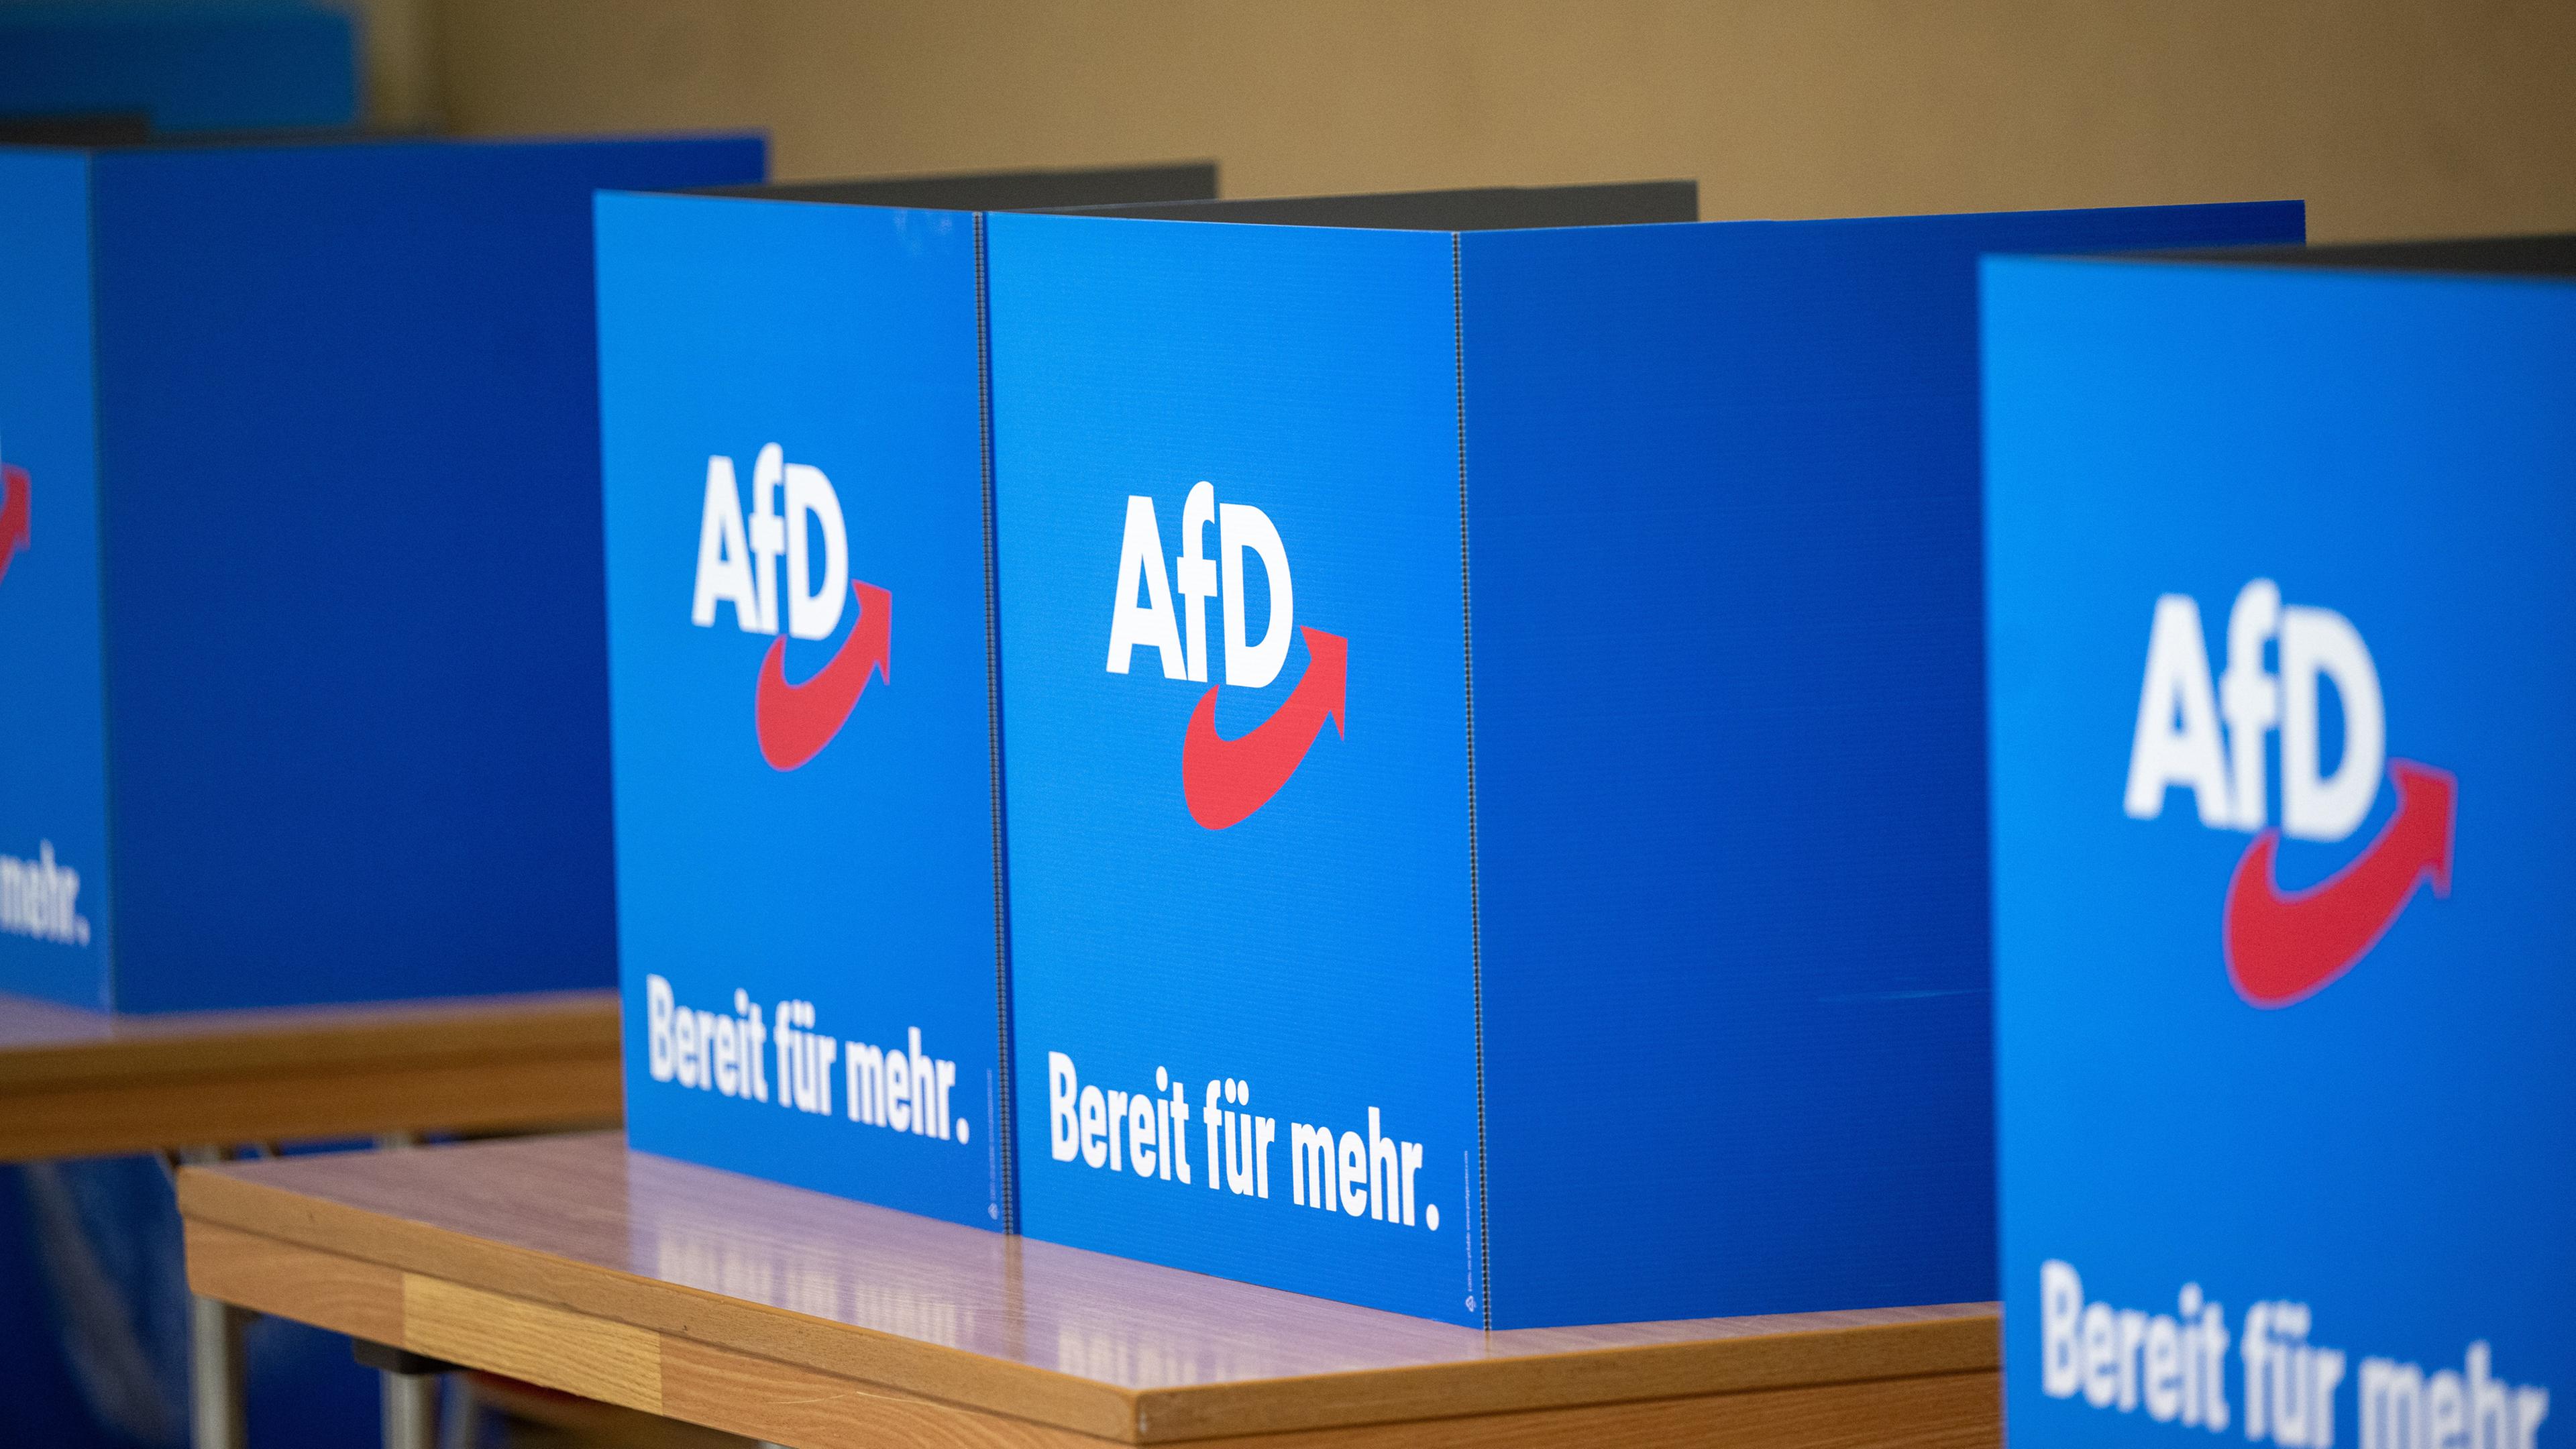 Typical: AfD